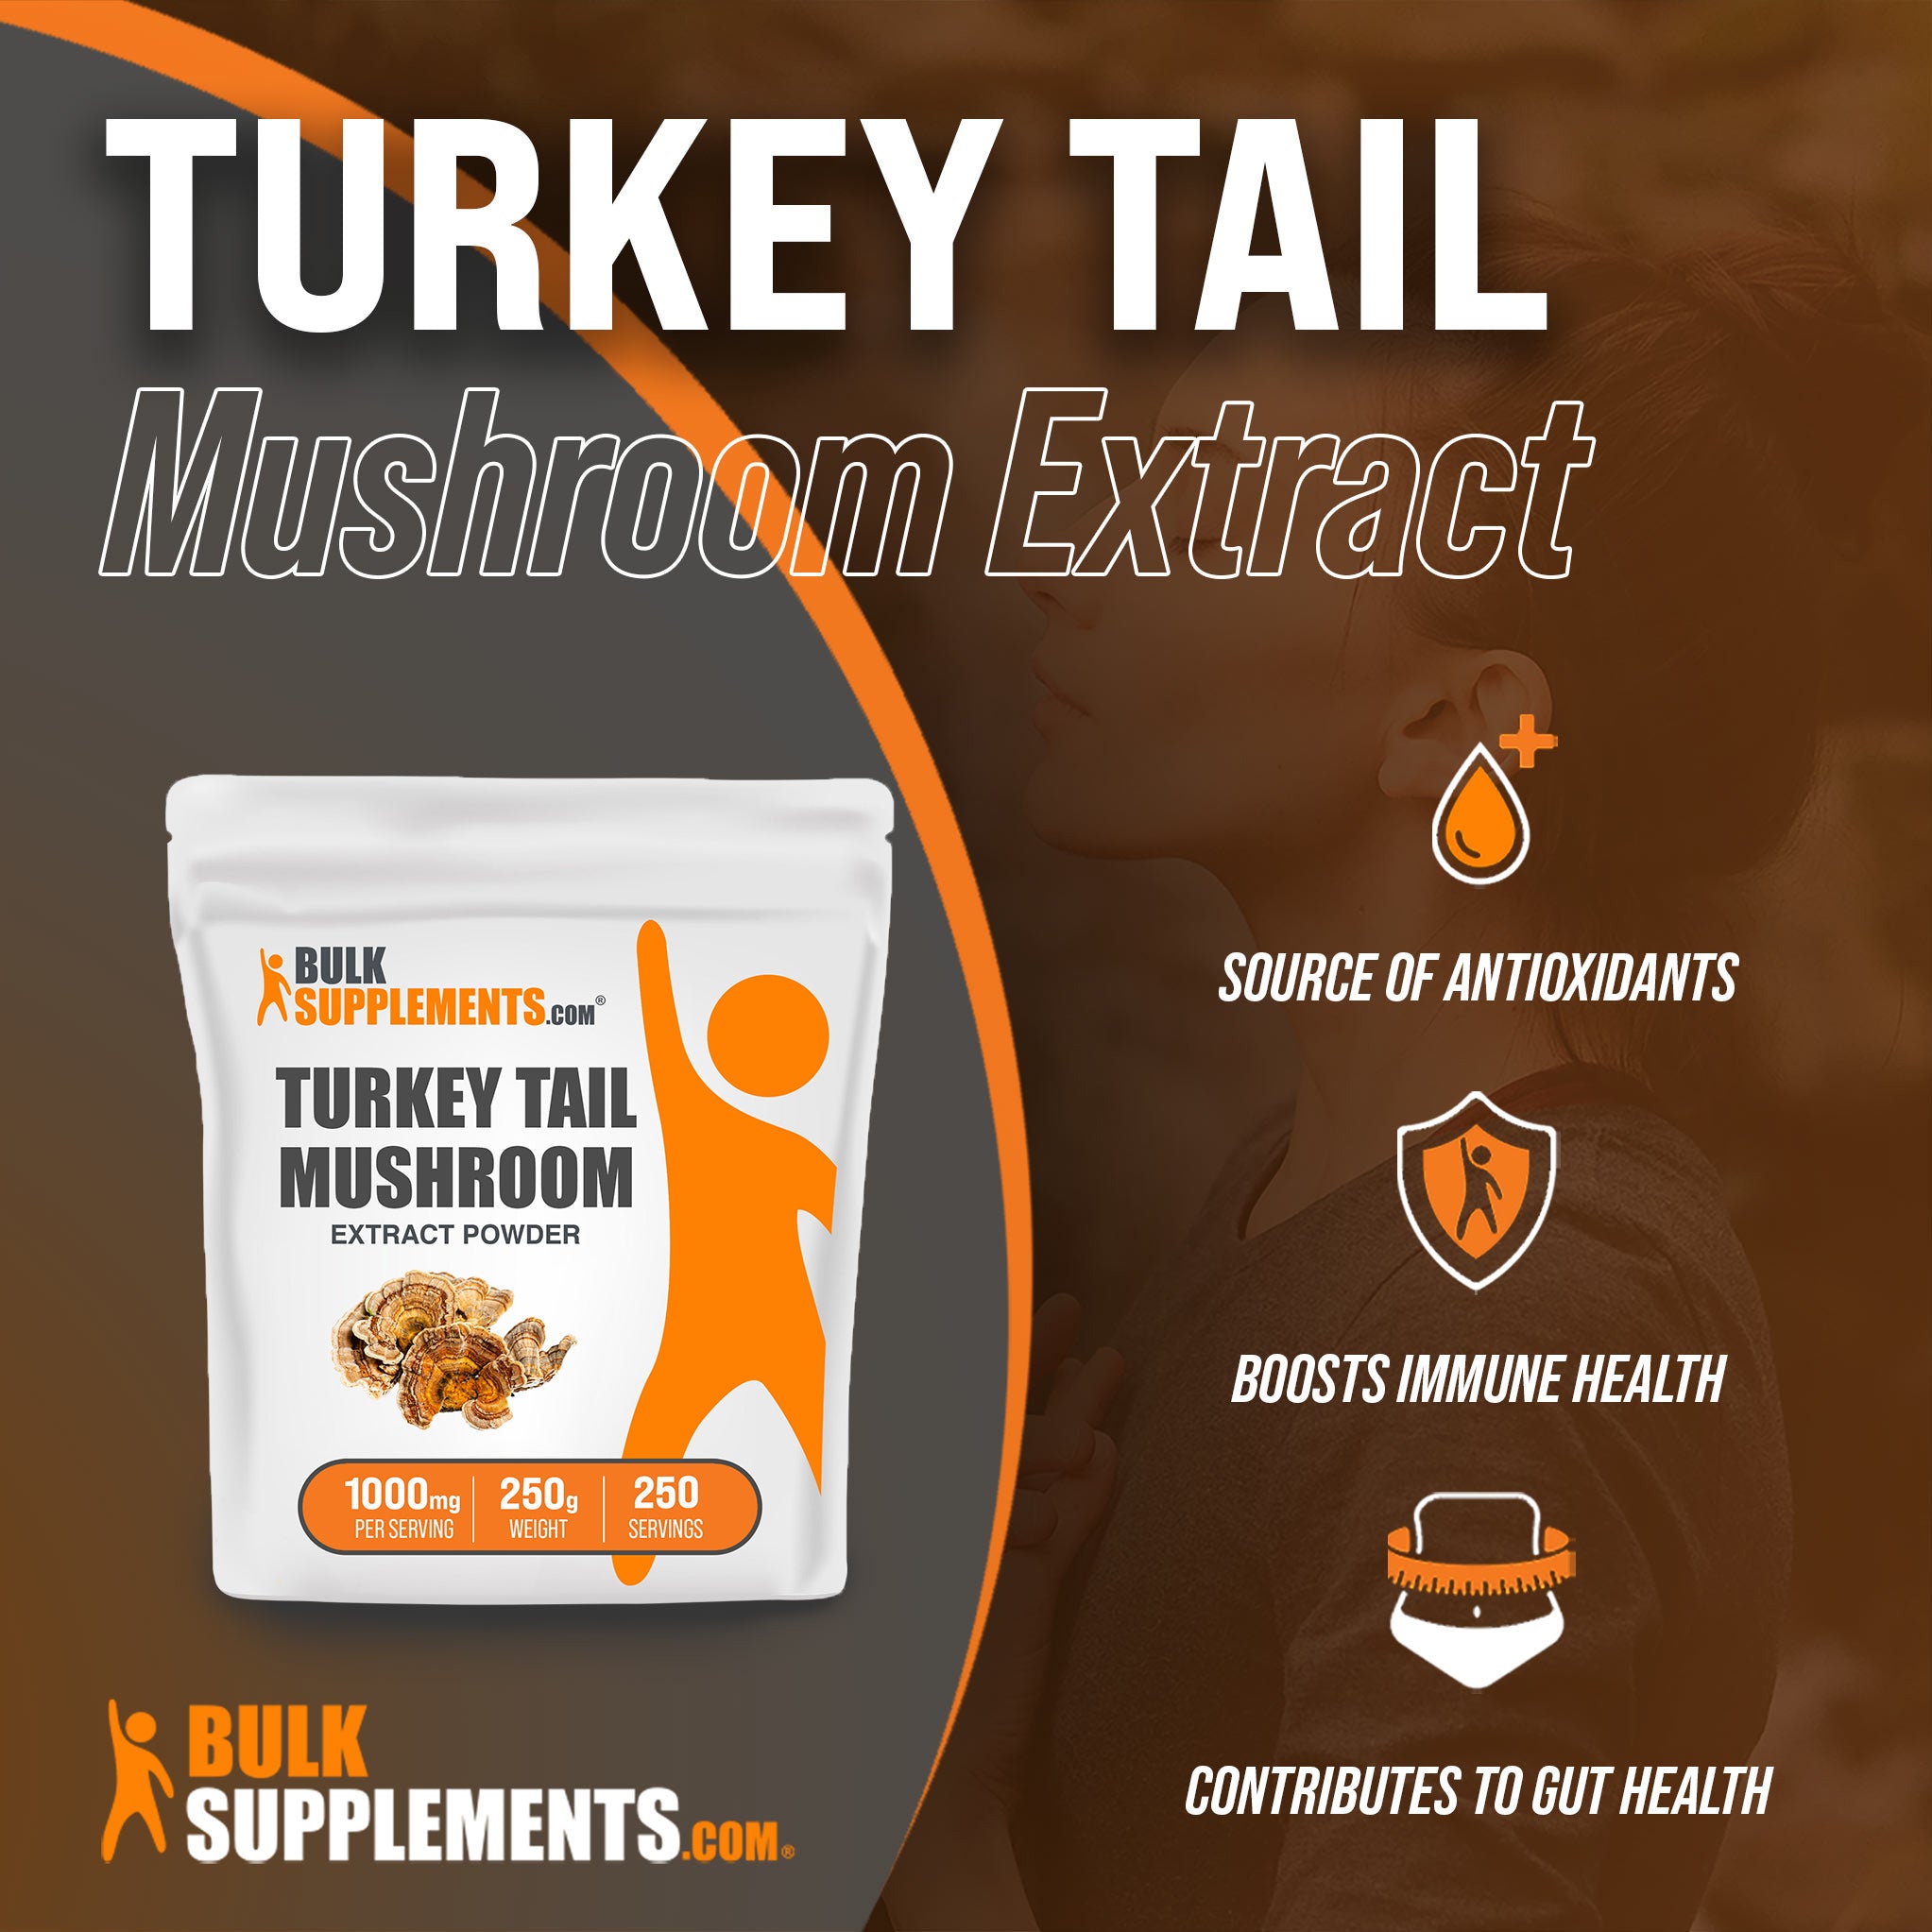 Benefits of Turkey Tail Mushroom Extract: source of antioxidants, boosts immune health, contributes to gut health